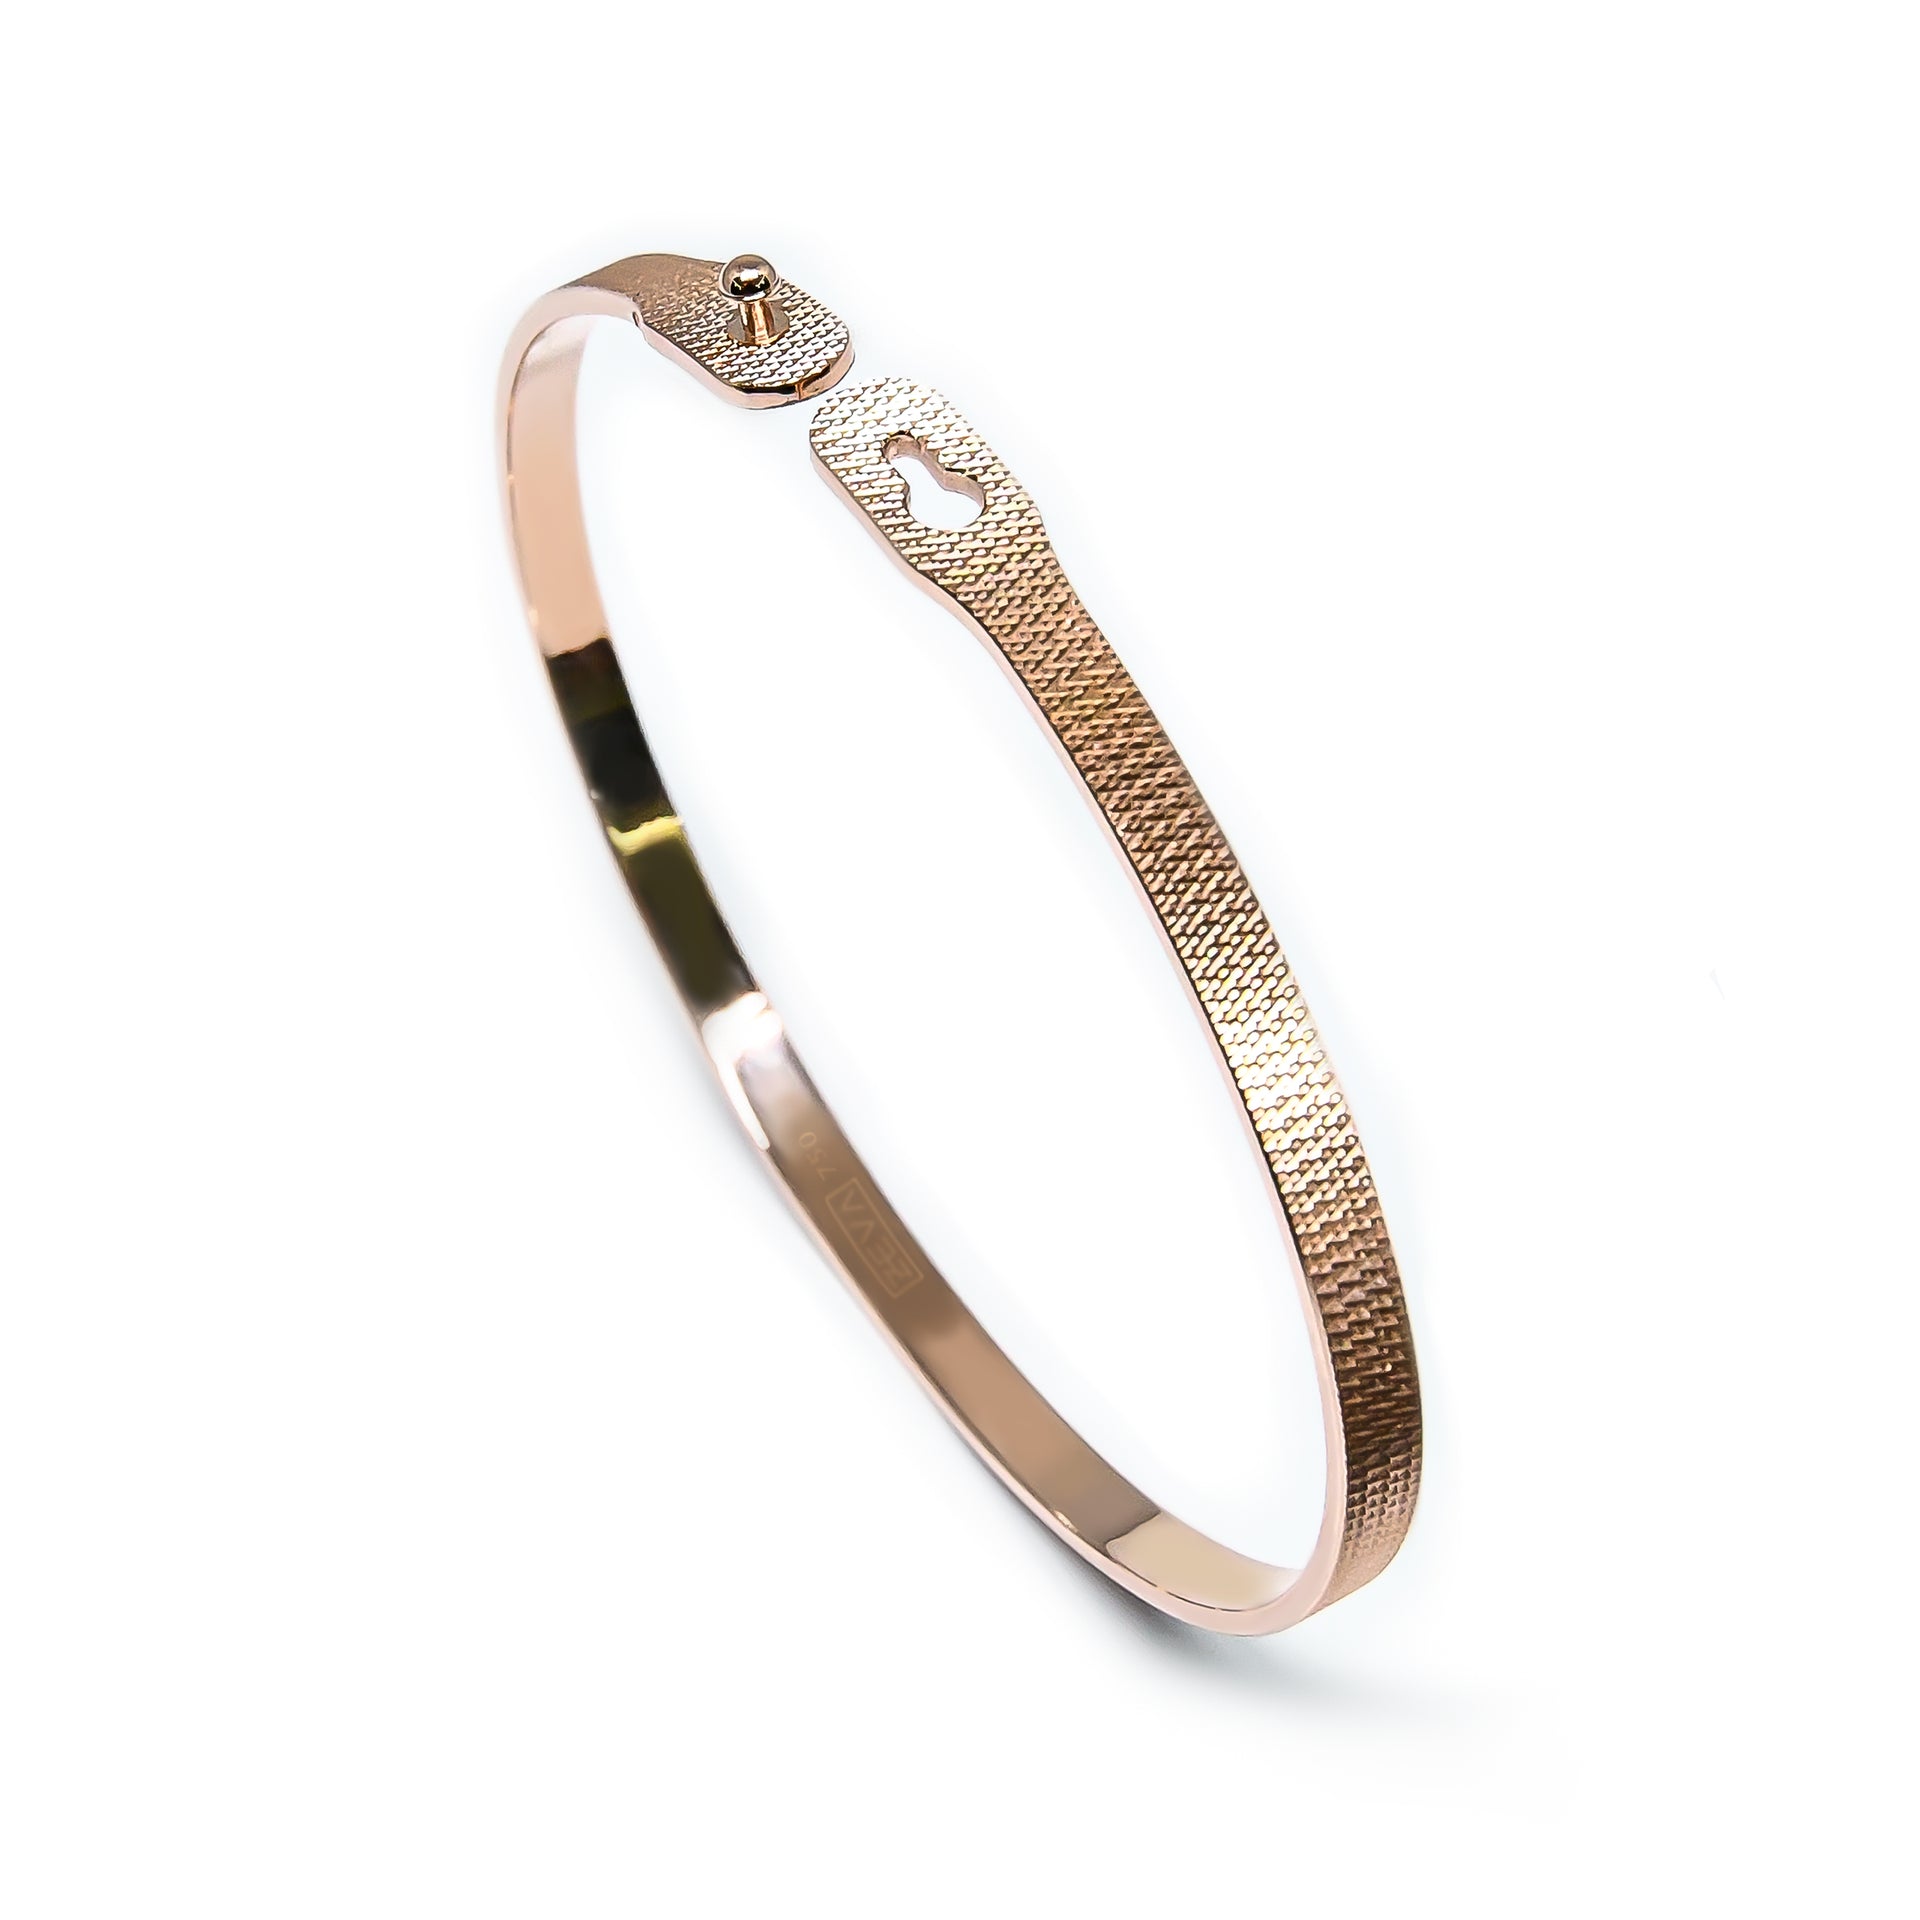 Bracelet WIRED 4mm flexible with pin claps red gold 18k 750